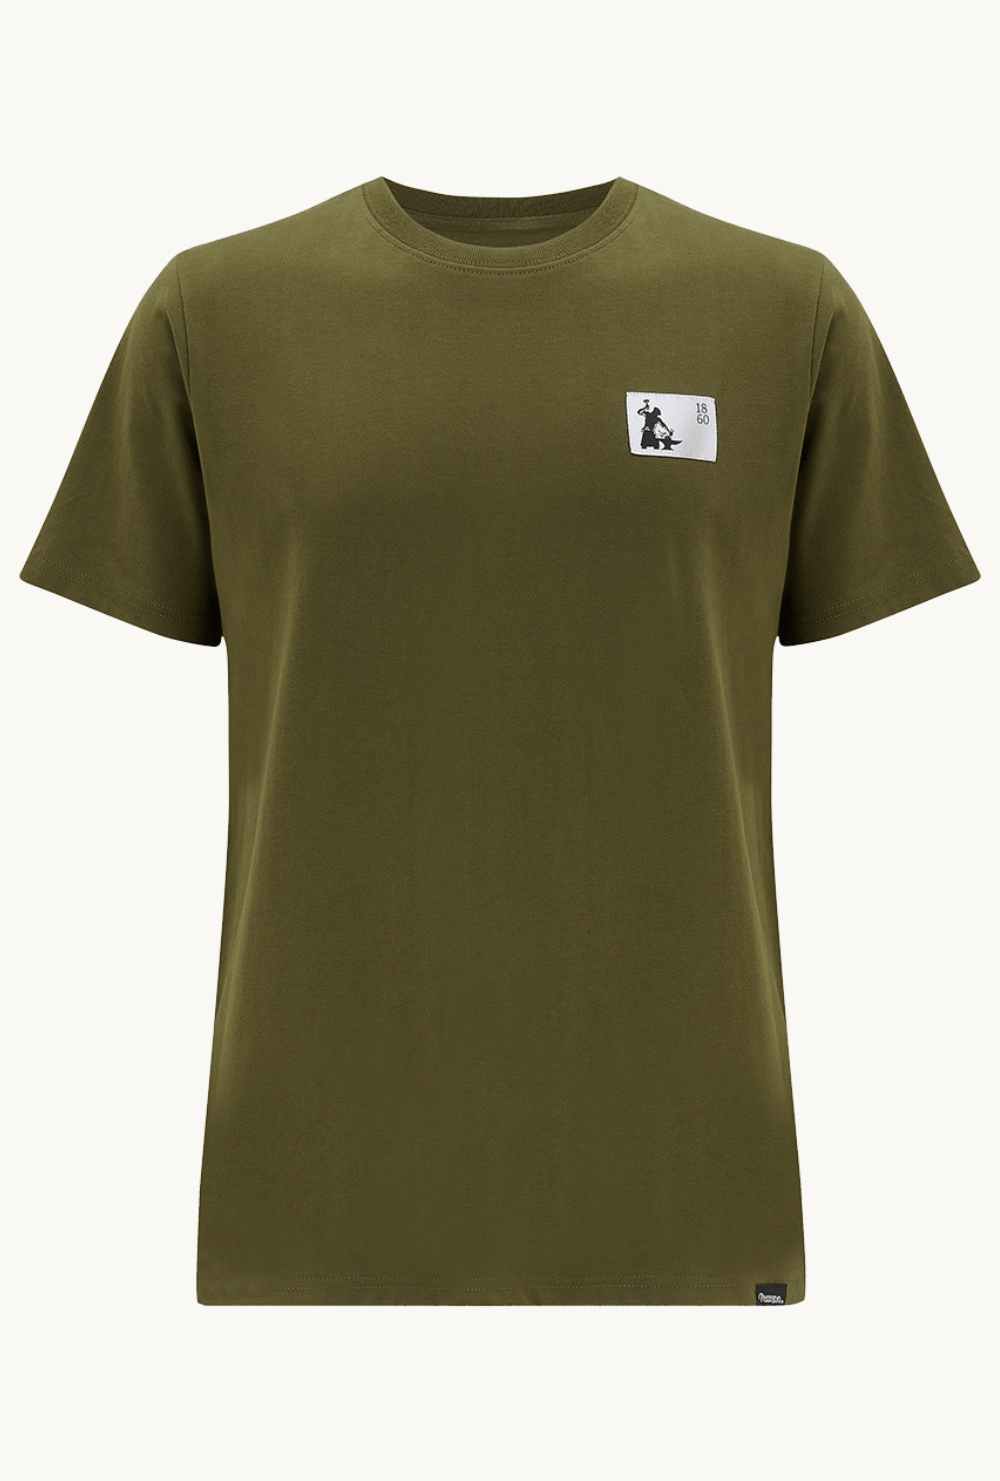 Pearson 1860  Put The Hammer Down - 100% Organic Cotton Unisex Cycling T-shirt Olive  X-large / Olive